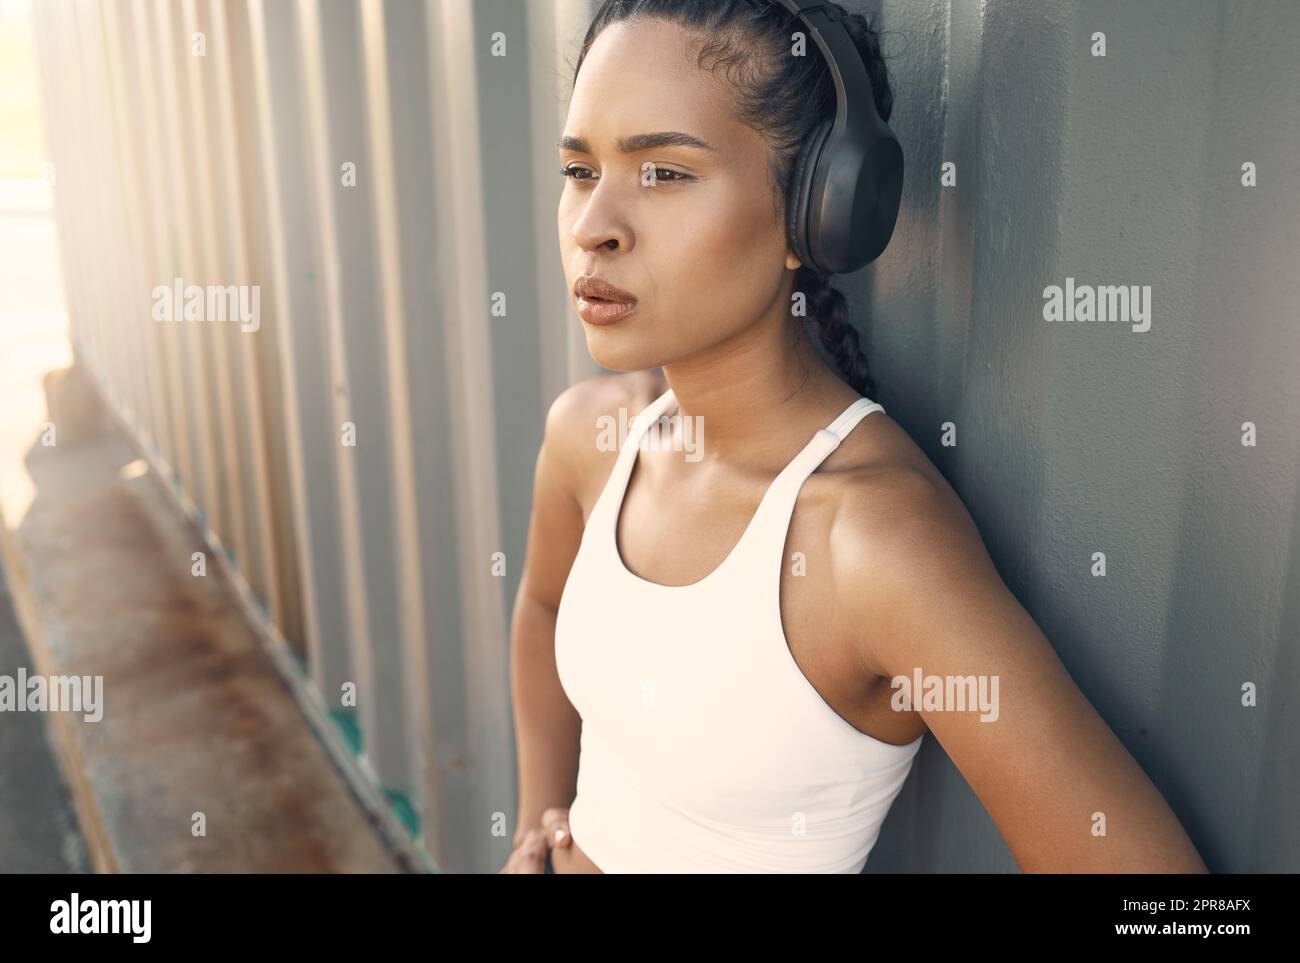 One fit young hispanic woman wearing headphones and taking a rest break to catch her breath after a run or jog in an urban setting outdoors. Female athlete looking tired after intense cardio exercise Stock Photo